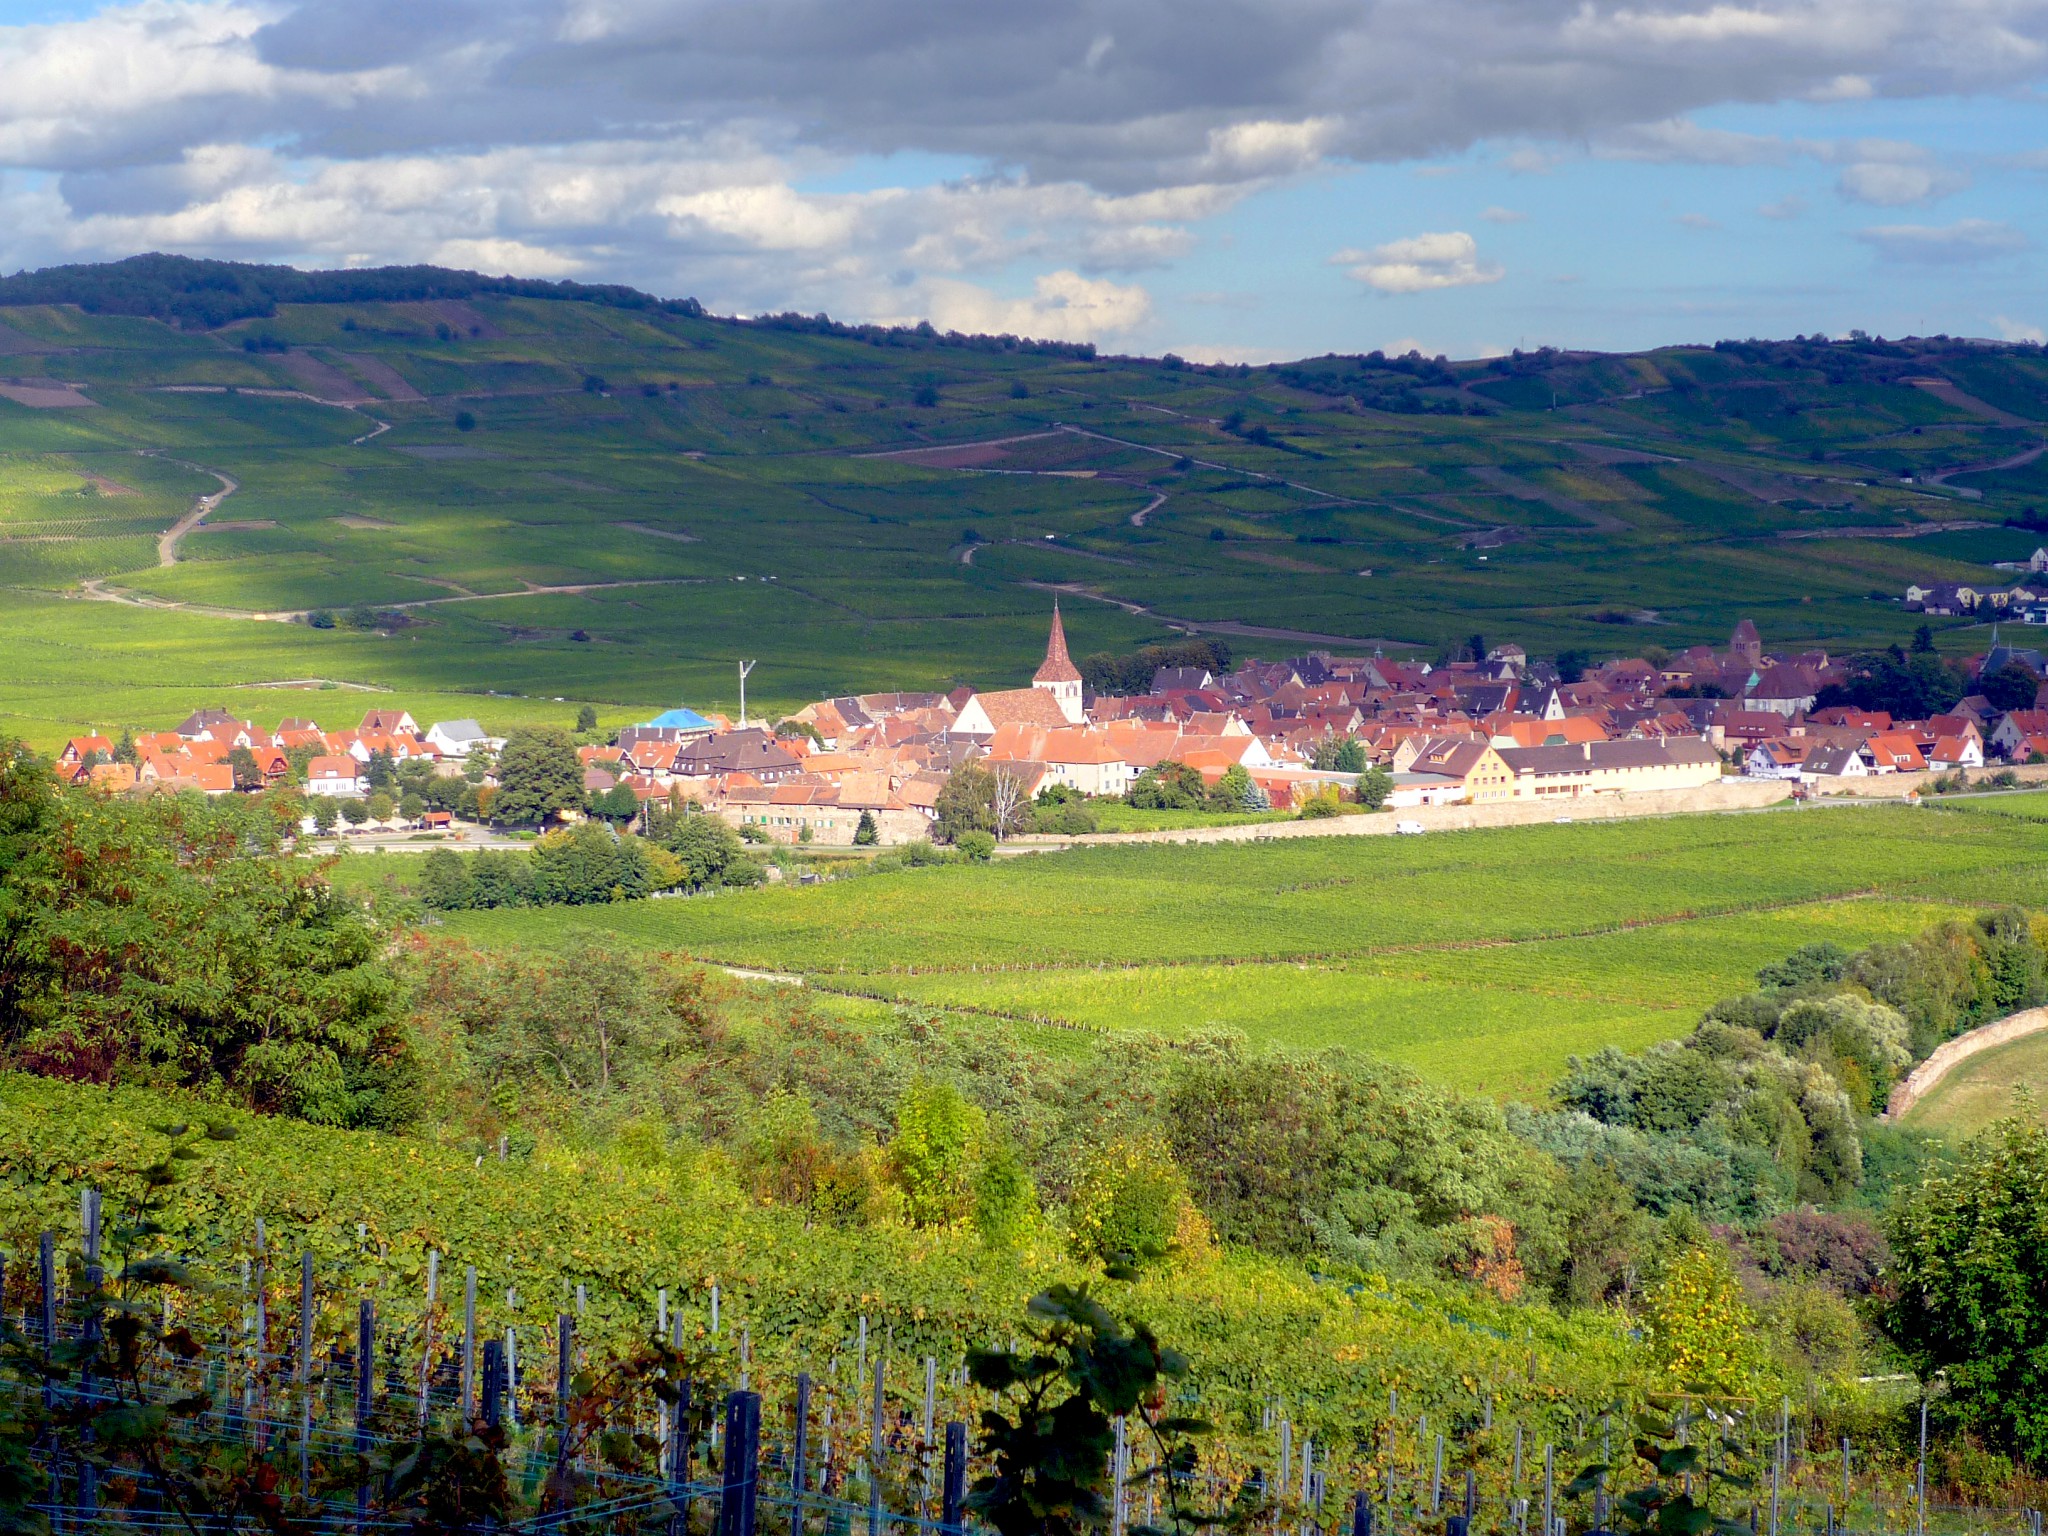 The village of Kientzheim surrounded by the vineyards © French Moments